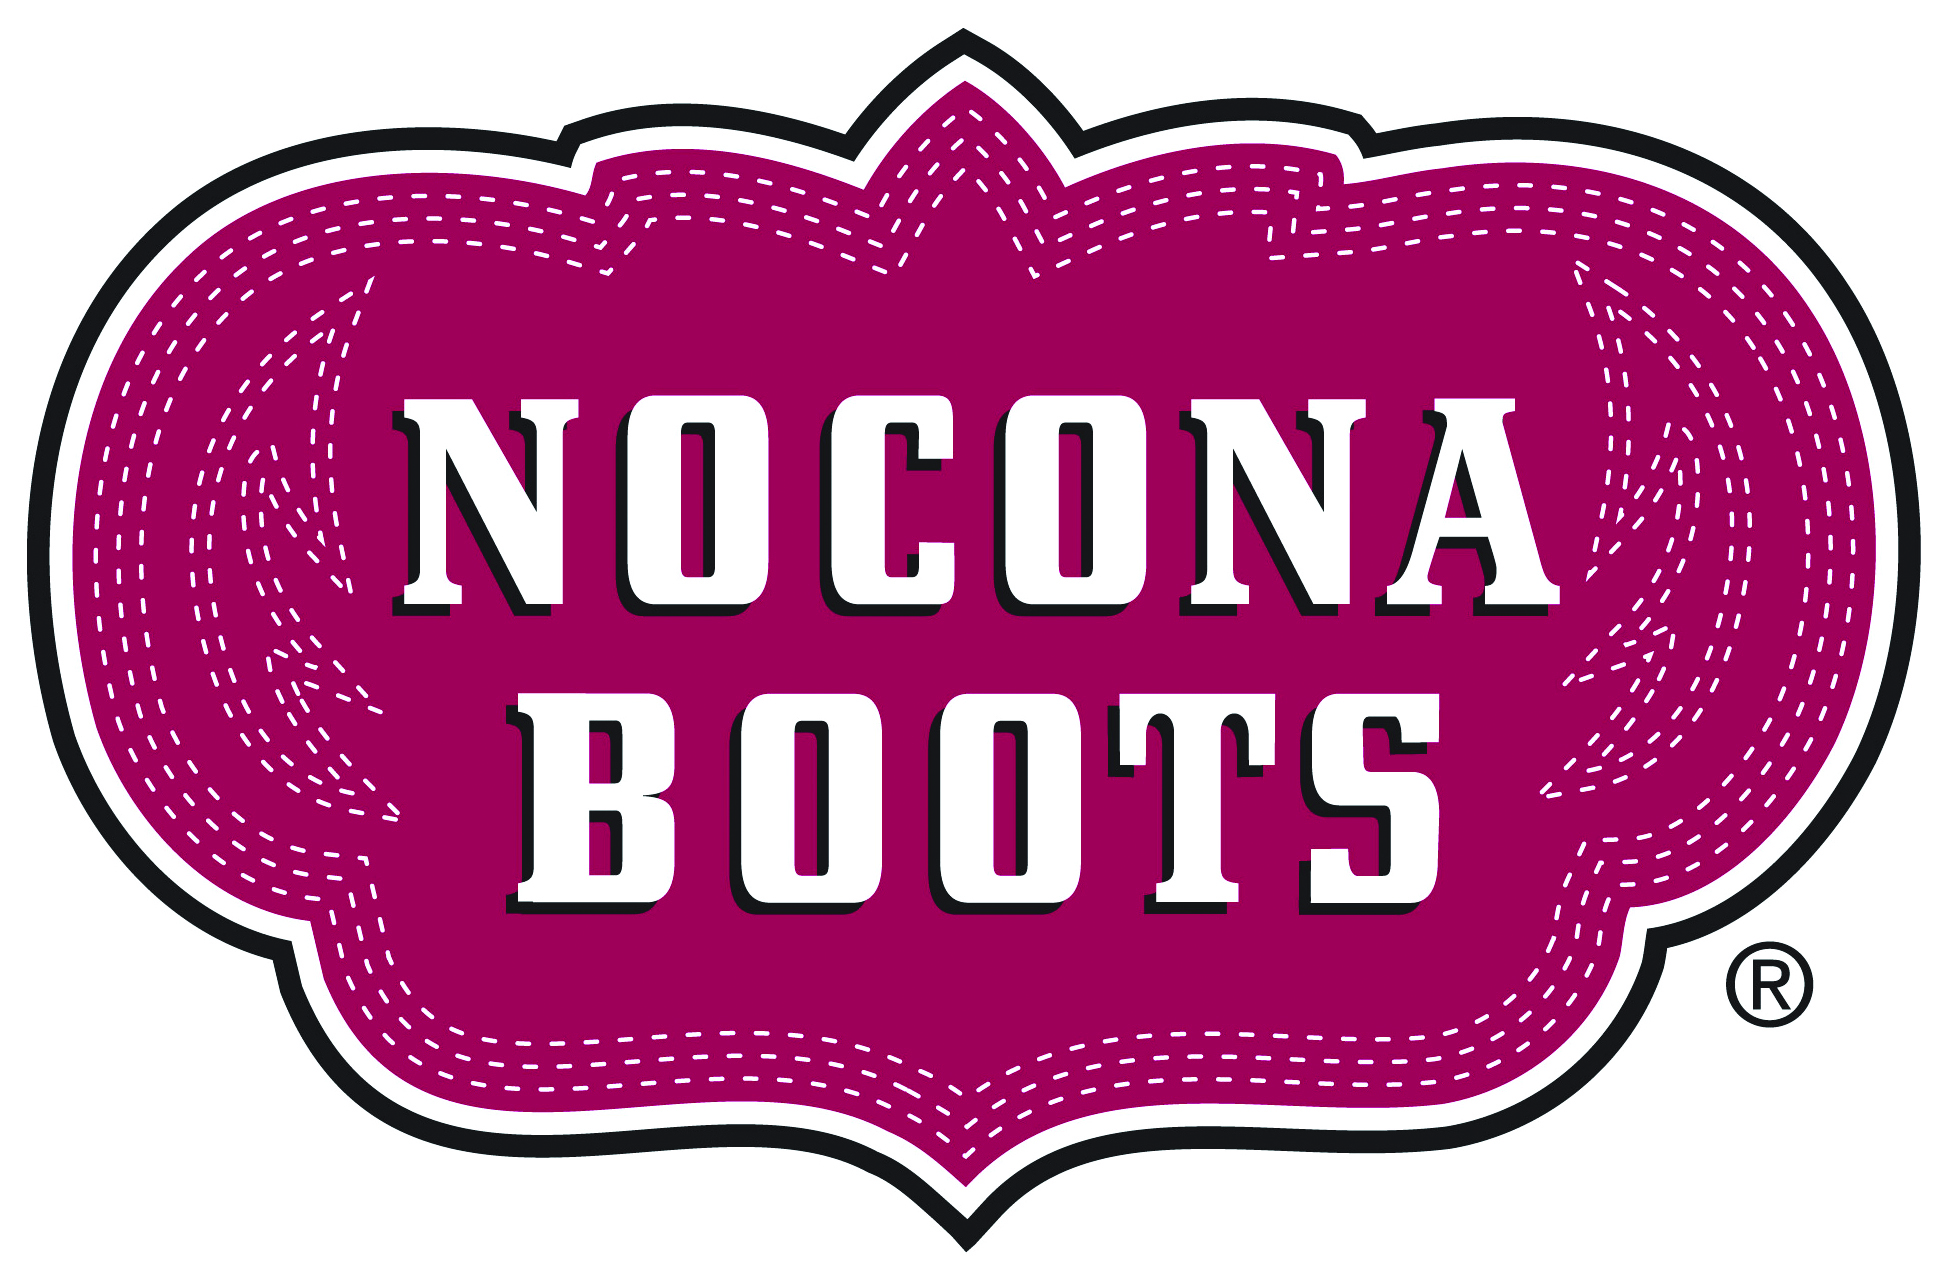 nocona-bootapos.western.wear.boutique.cleburne.alvarado.texas.shoes.boots.jewelry-01.jpg